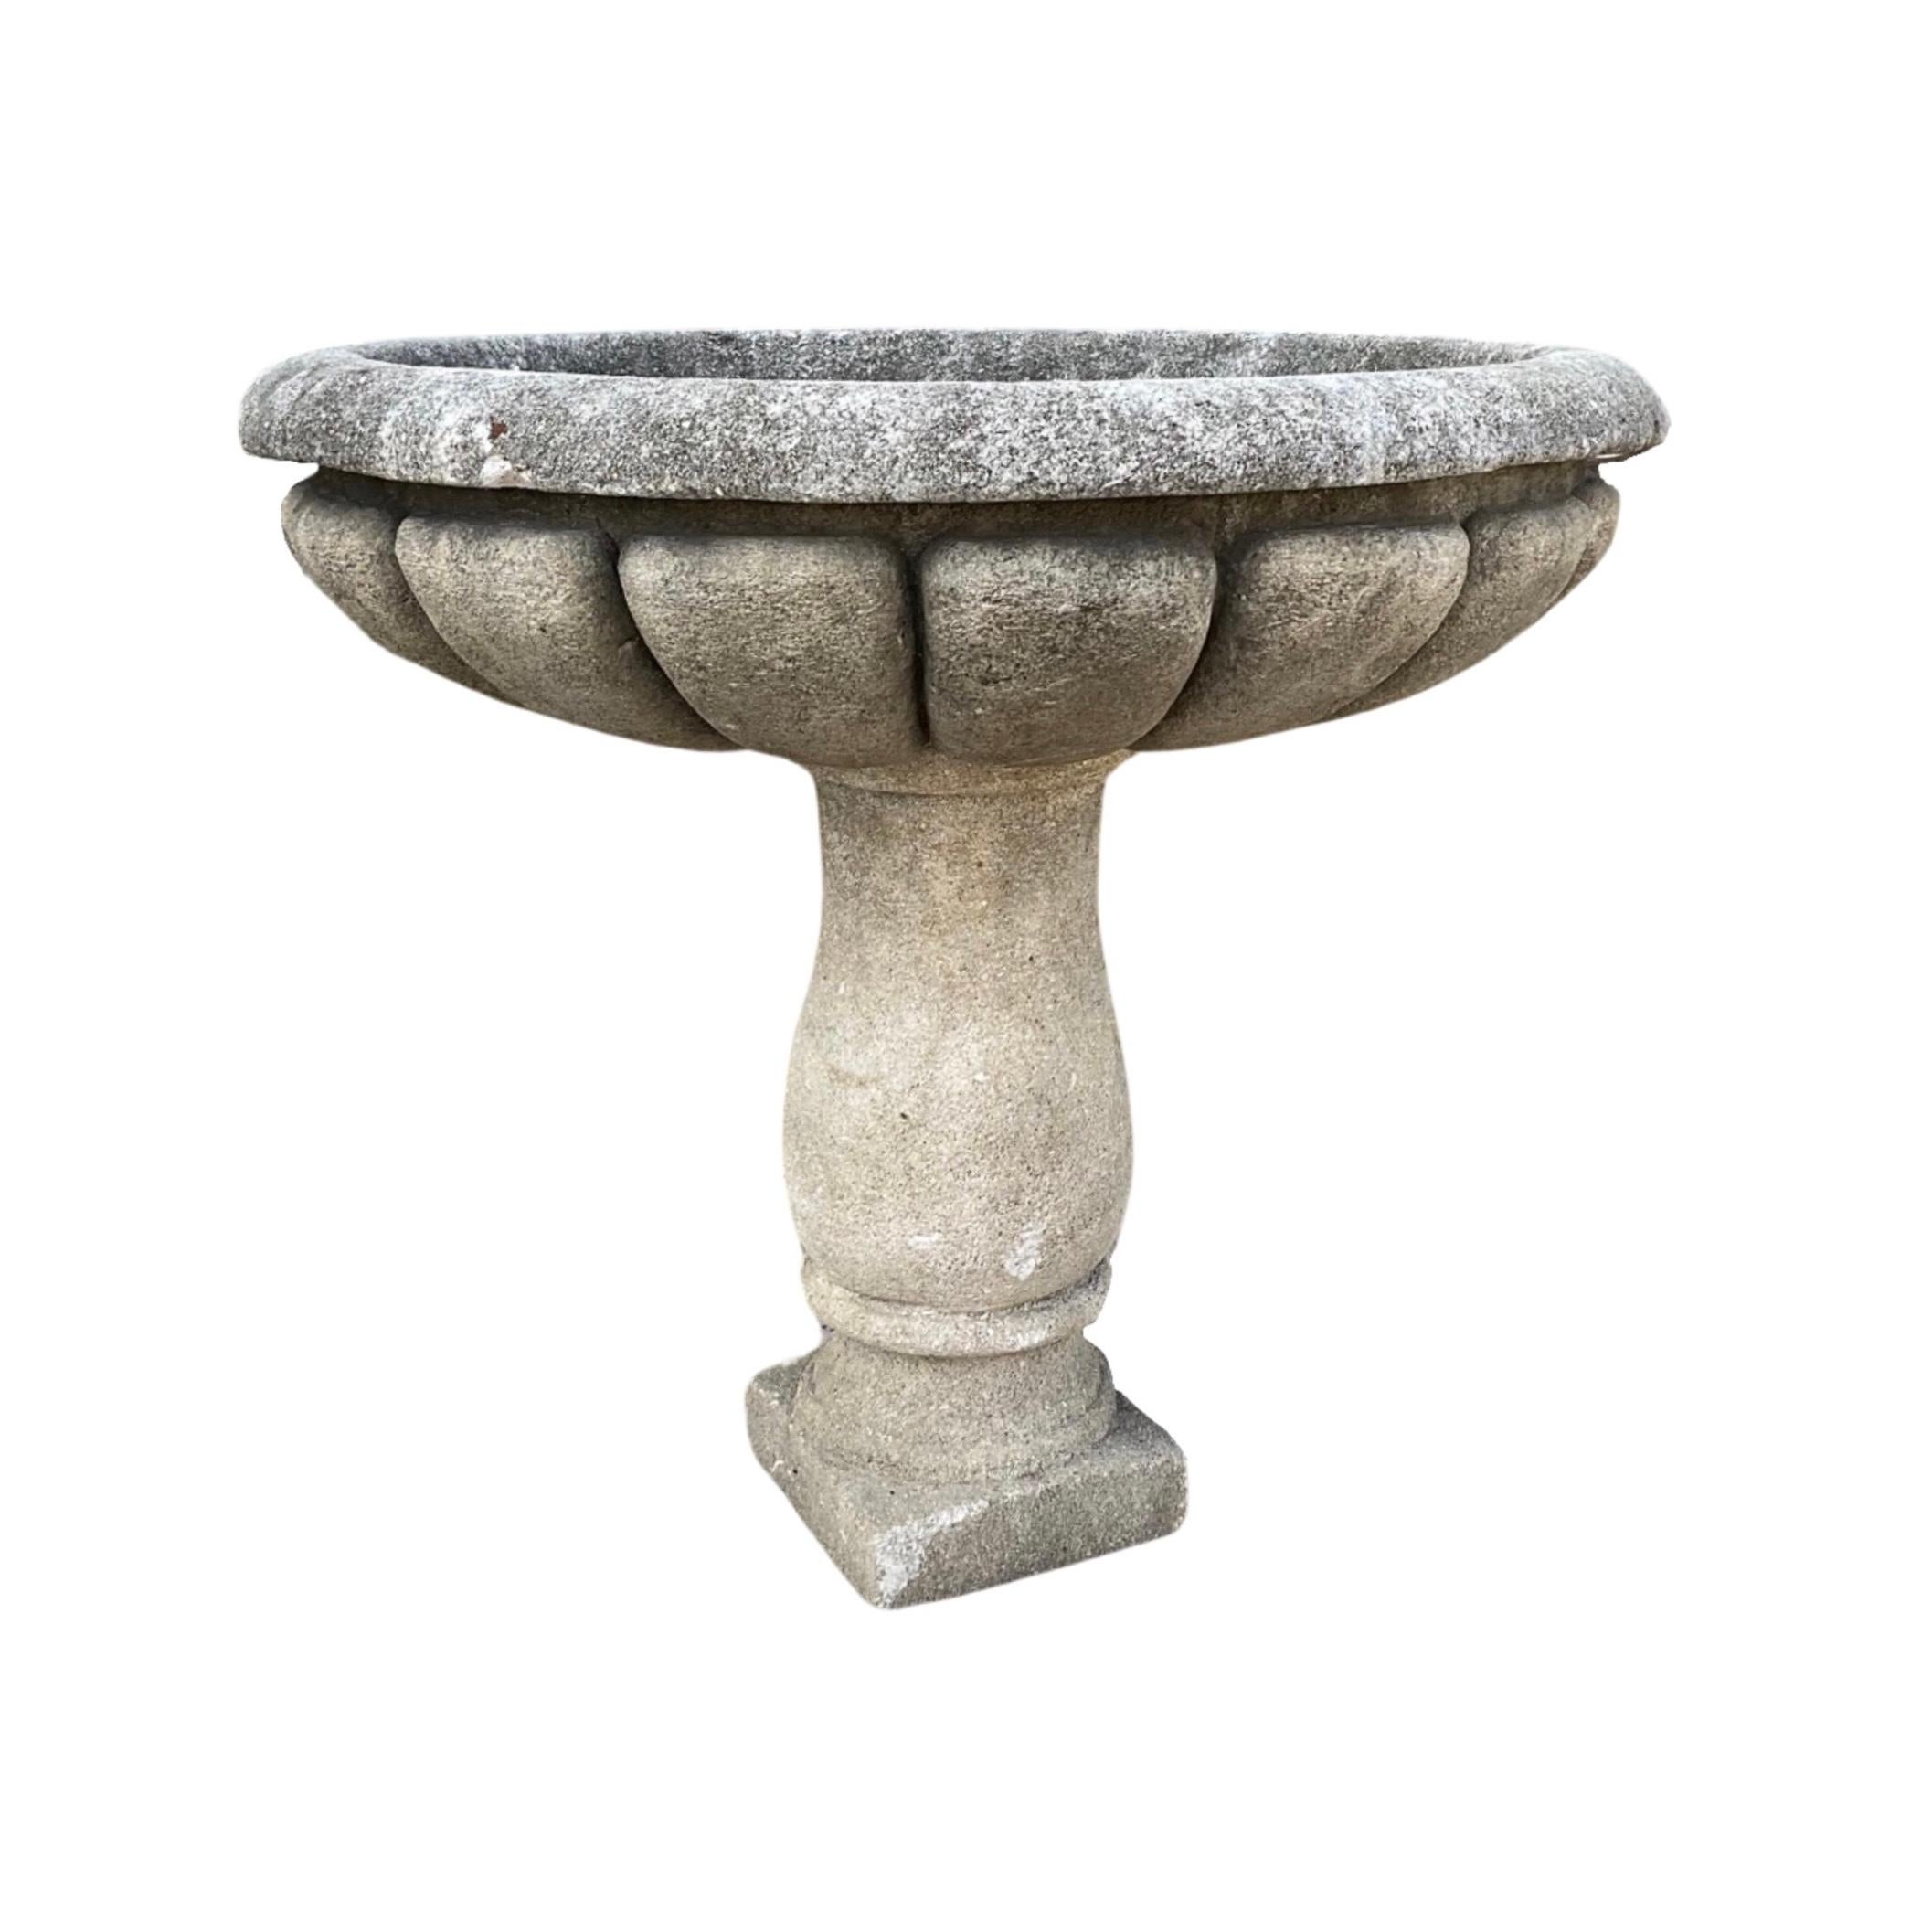 This 18th-century French Limestone Birdbath is a luxurious addition to any outdoor space. Its hand-carved circular design and pillar base make it a true one-of-a-kind. Made with premium limestone, this exquisite birdbath is sure to last for many